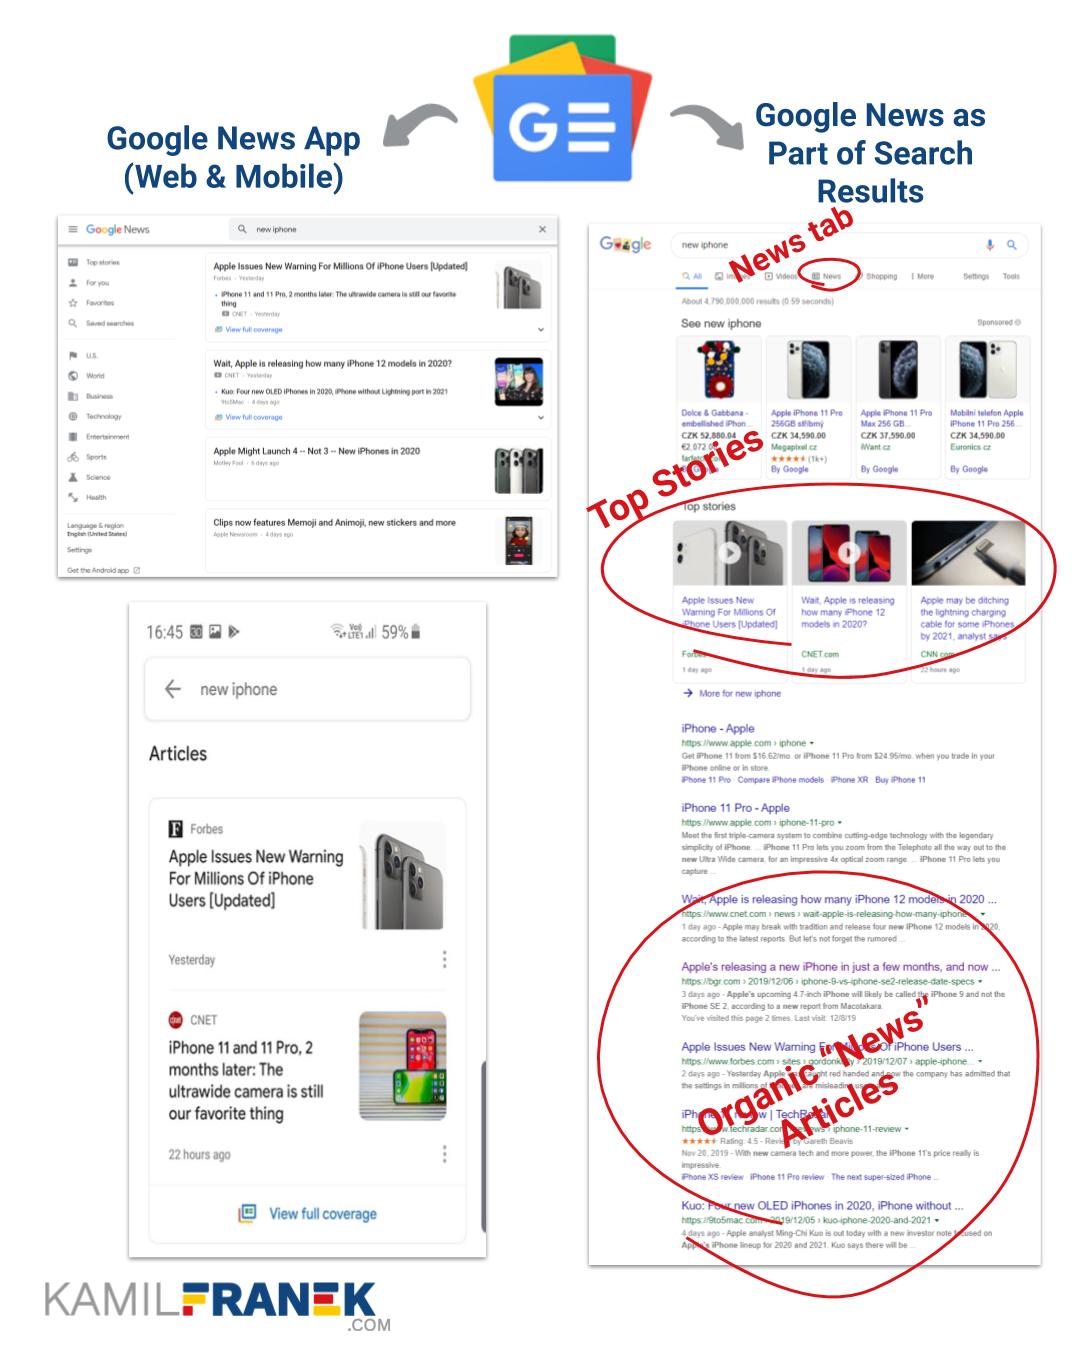 Visual of showing Google News App vs. Google News as part of Google Search